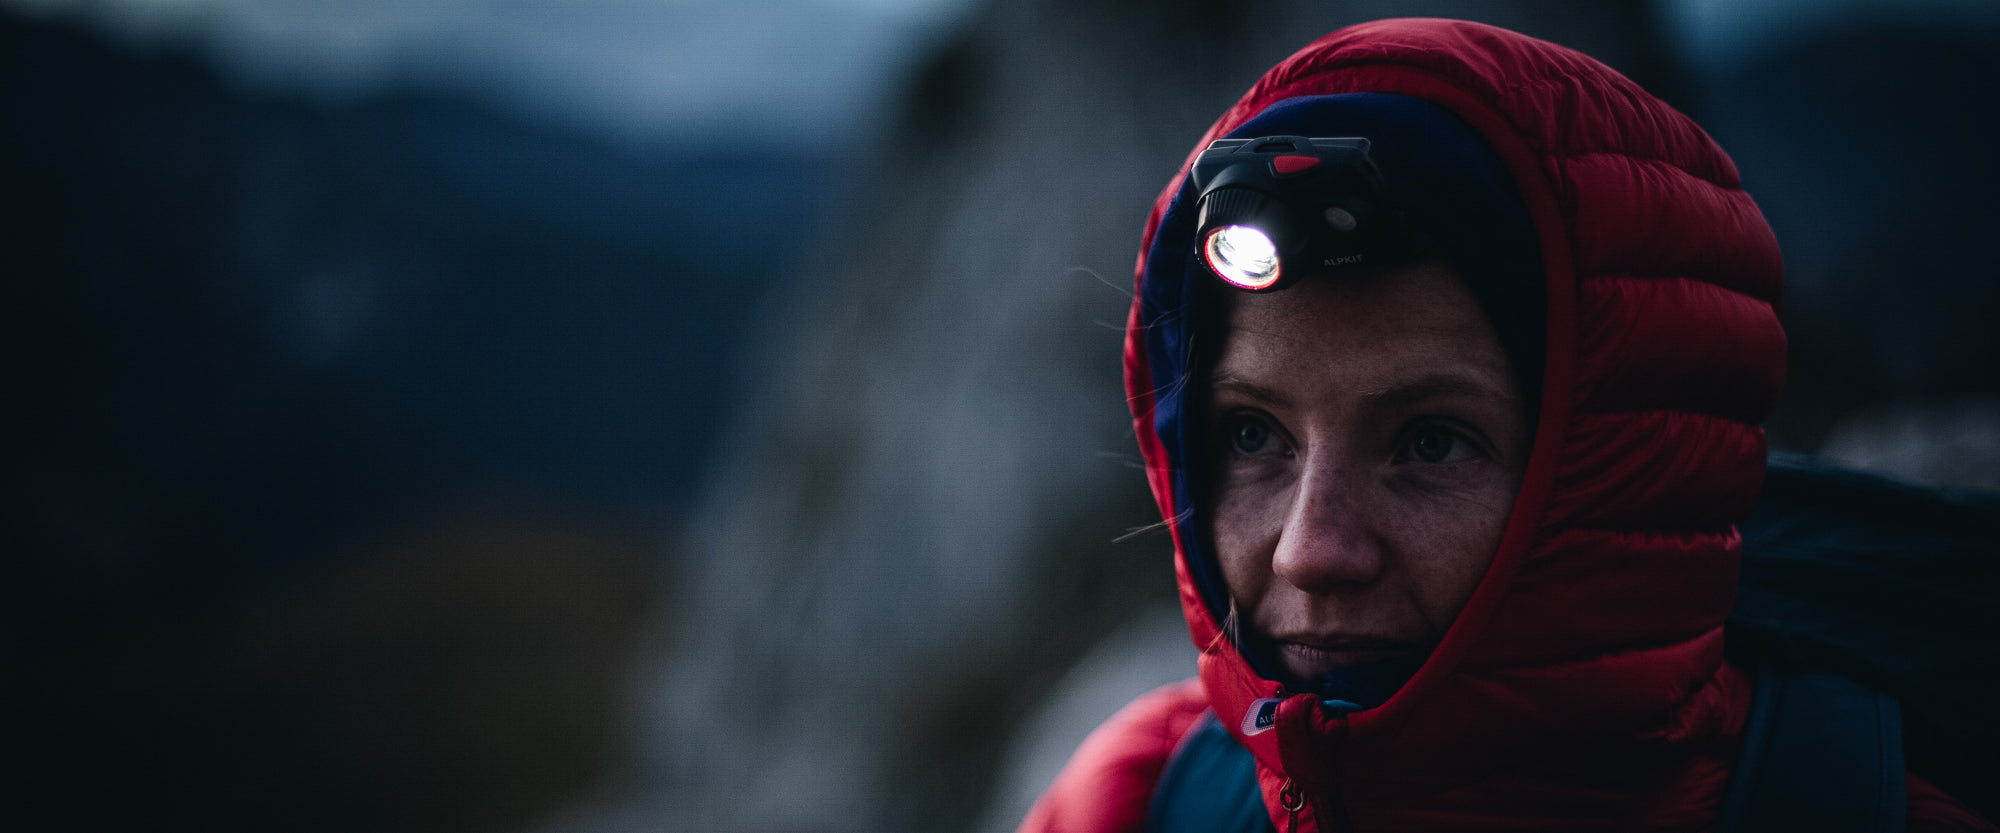 Headtorches for Hill Walking: Illuminating the Advantages